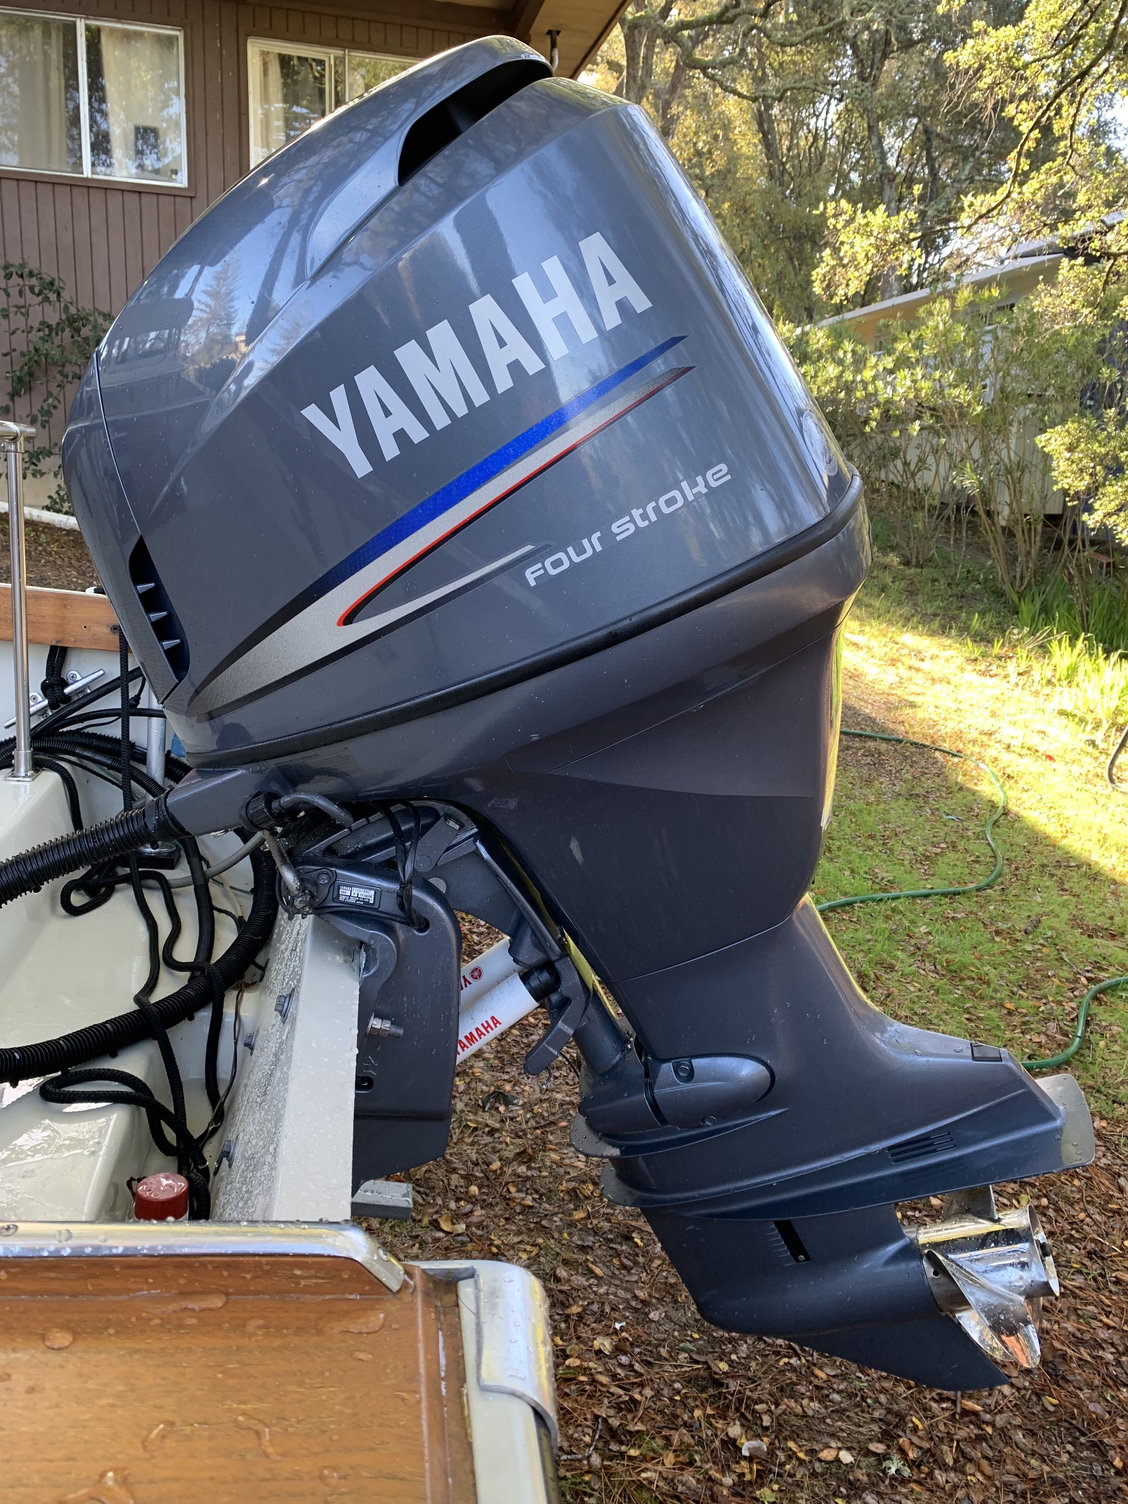 For sale Yamaha 115 TXRB outboard - The Hull Truth - Boating and ...
